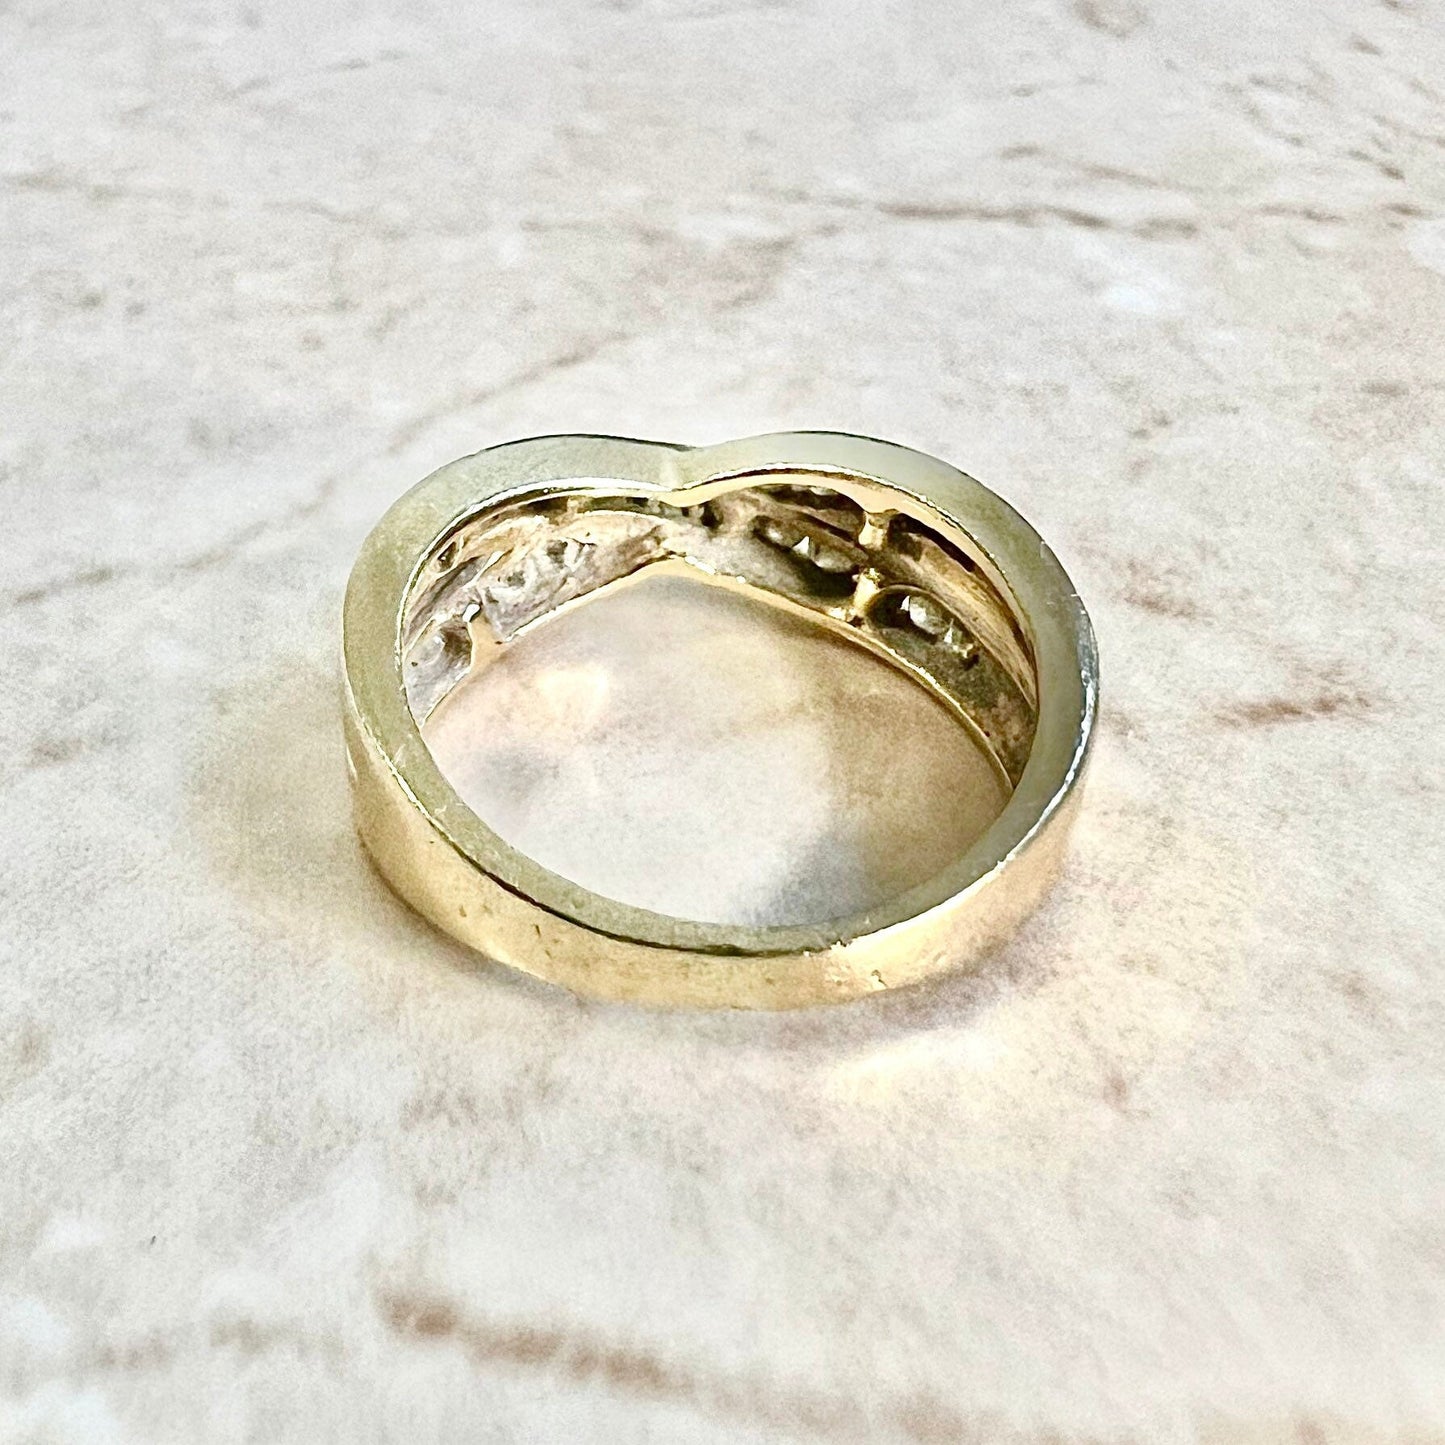 Vintage 14K Diamond Crossover Band Ring - Yellow Gold Diamond Ring - Diamond Wedding Ring - Diamond Cocktail Ring - Best Gifts For Her